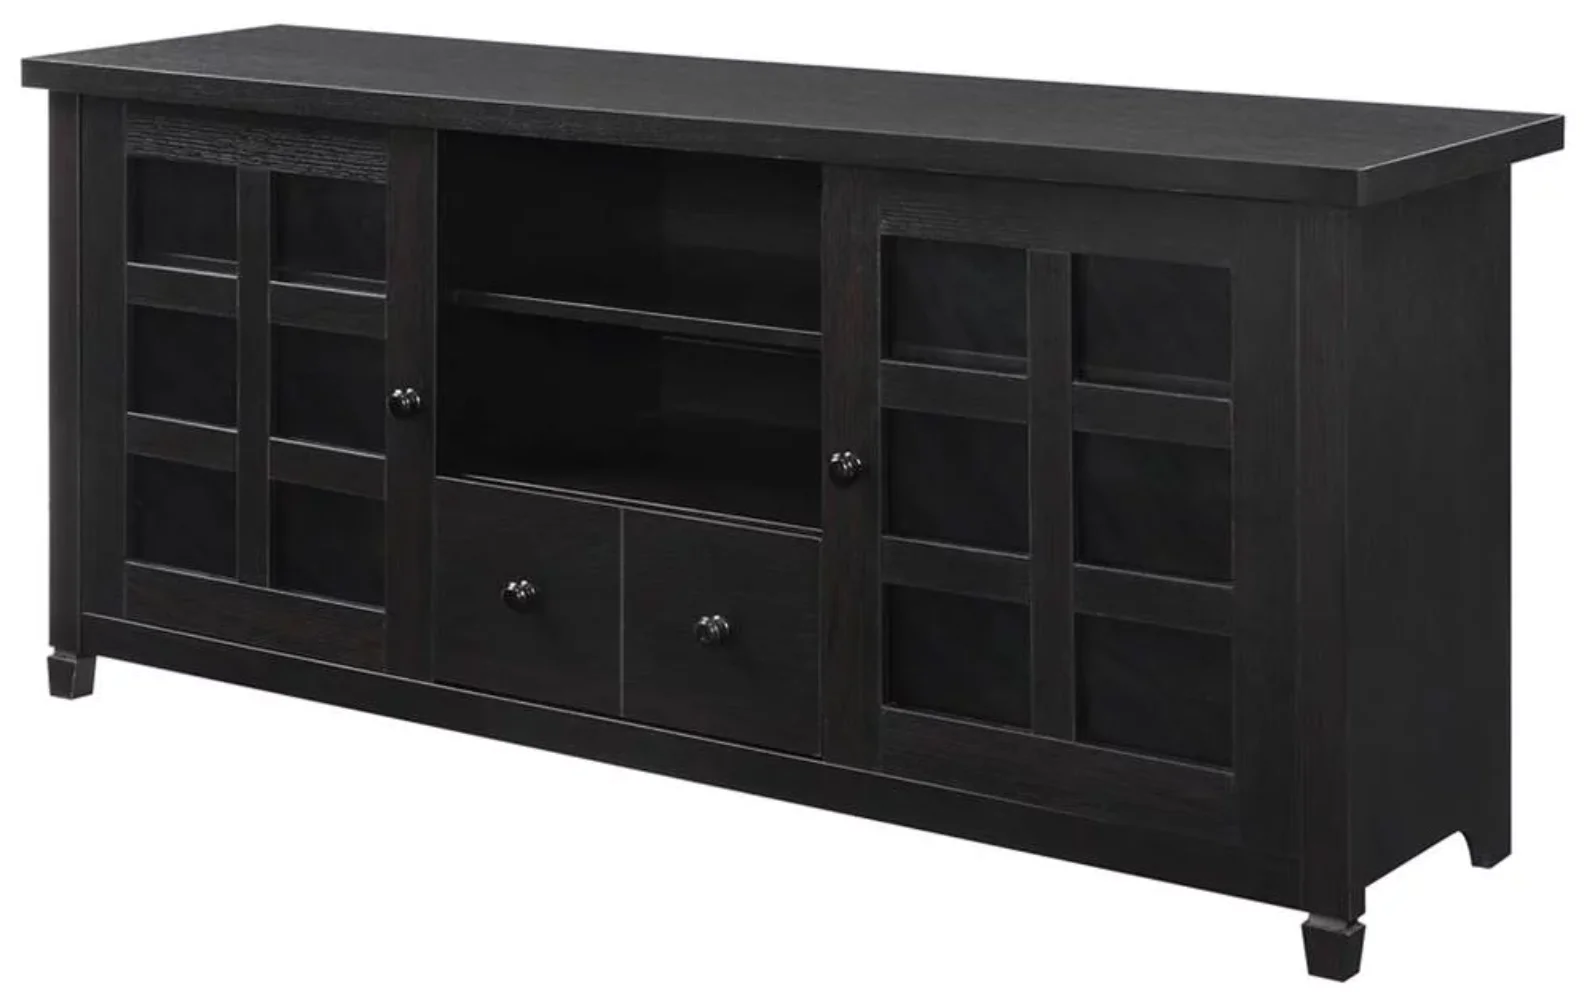 

Newport Park Lane 1 Drawer TV Stand with Storage Cabinets and Shelves for TVs up to 65 Inches, Espresso